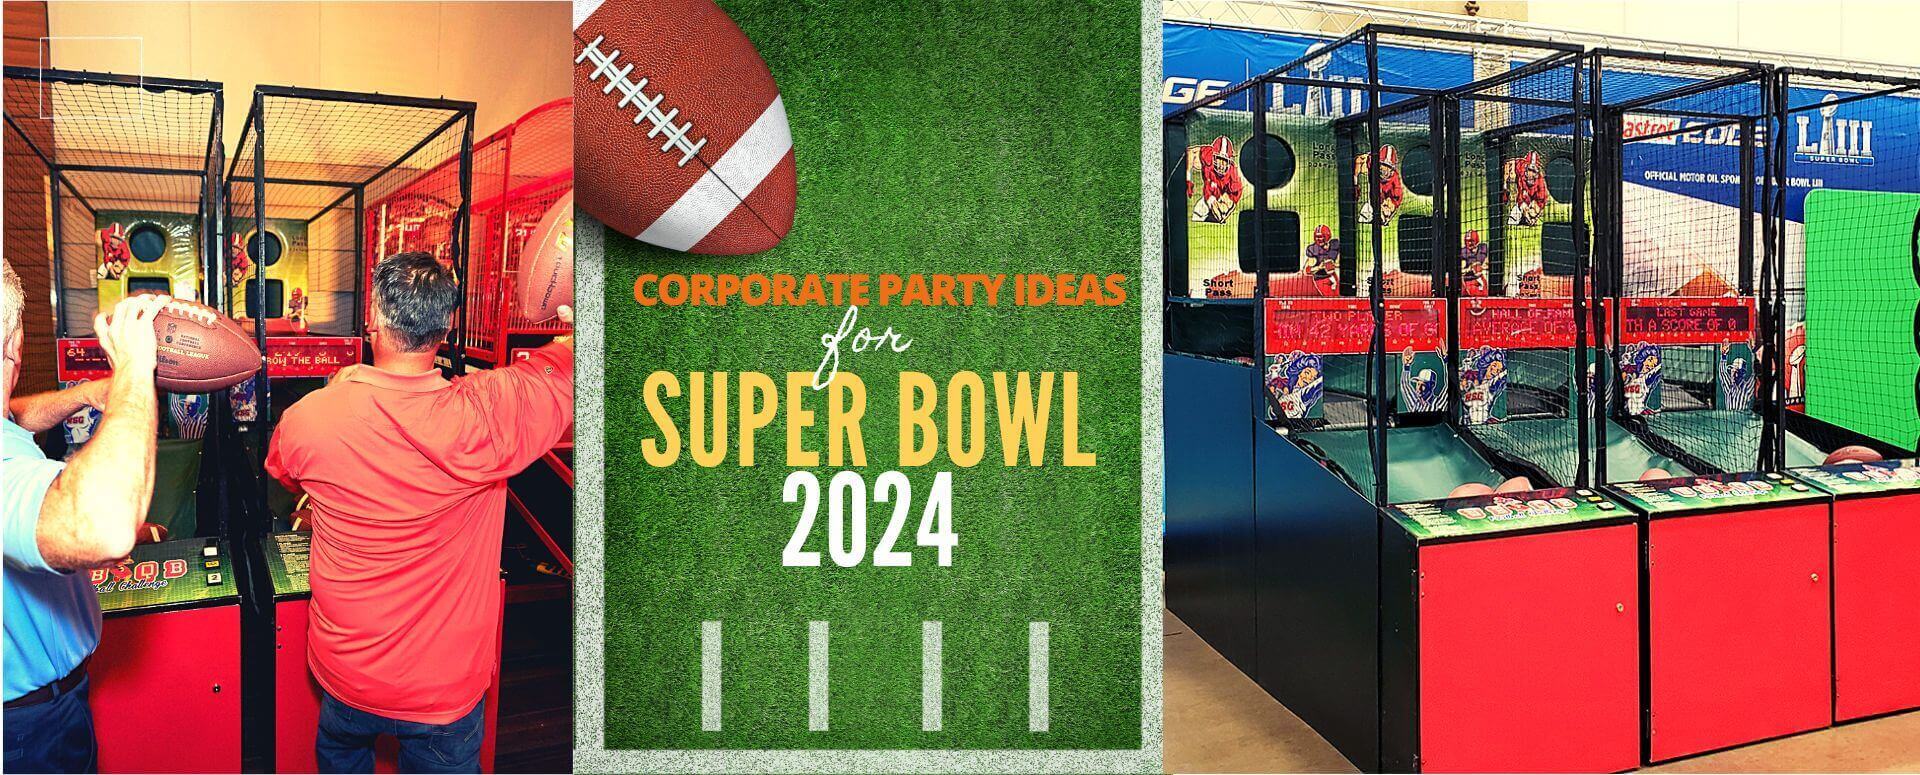 Corporate Party Ideas fro Super Bowl